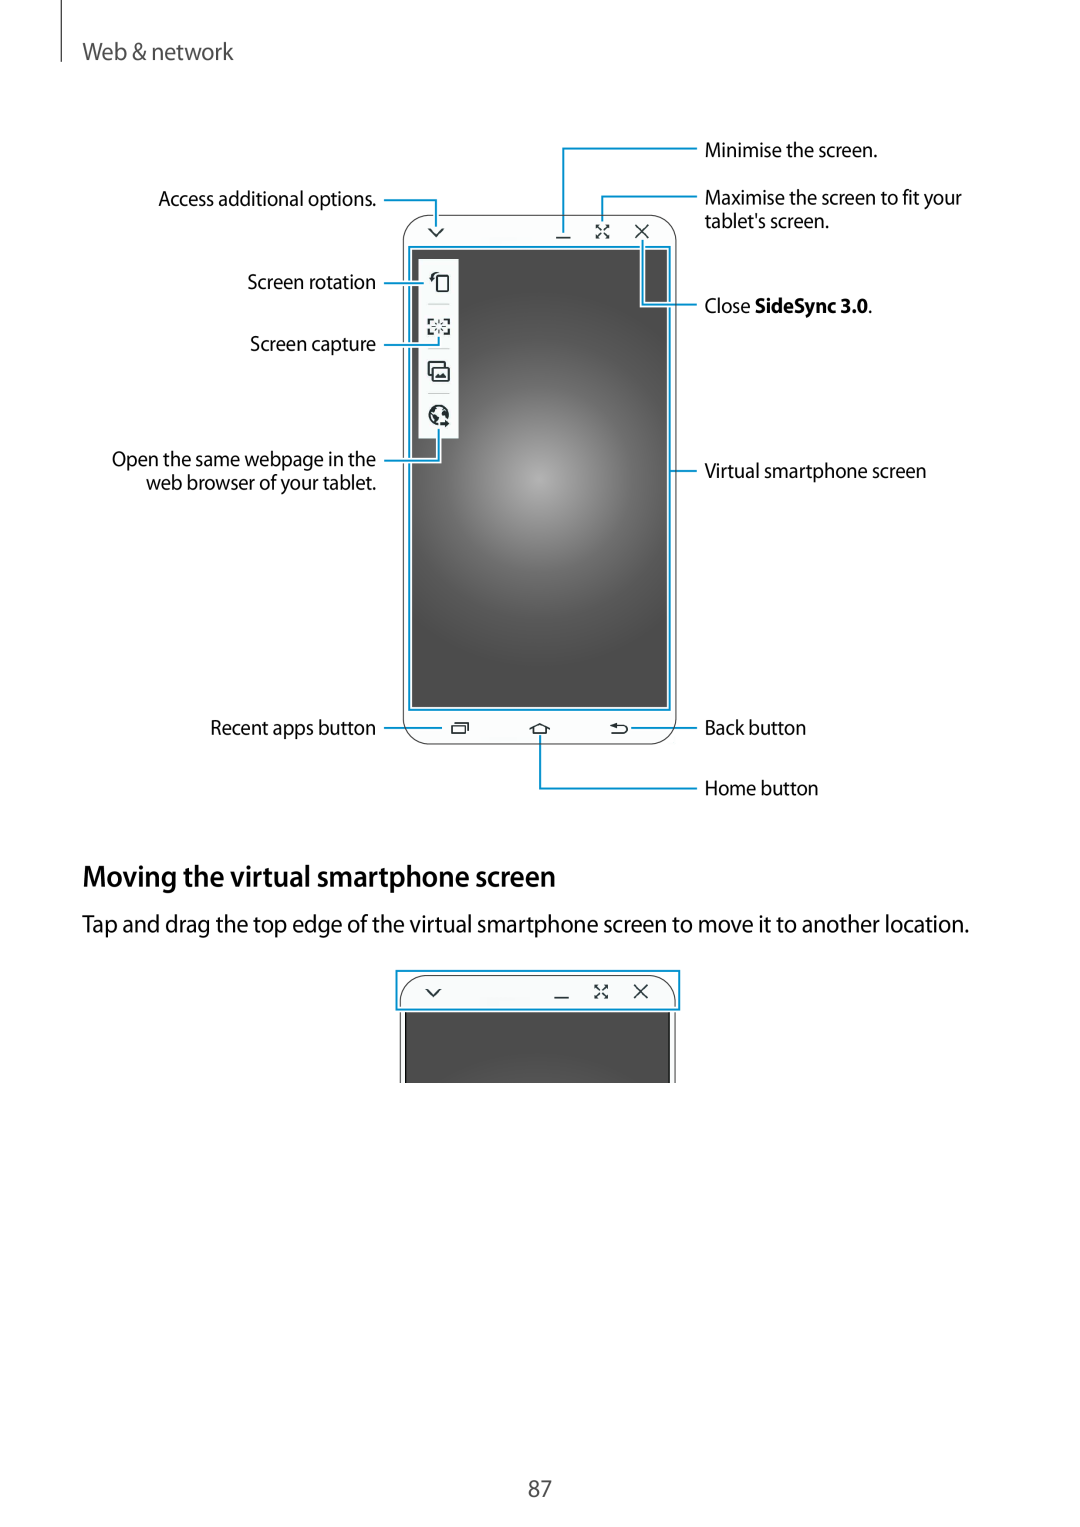 Samsung SM-P9000ZWYEUR manual Moving the virtual smartphone screen, Web & network, Recent apps button, Close SideSync 